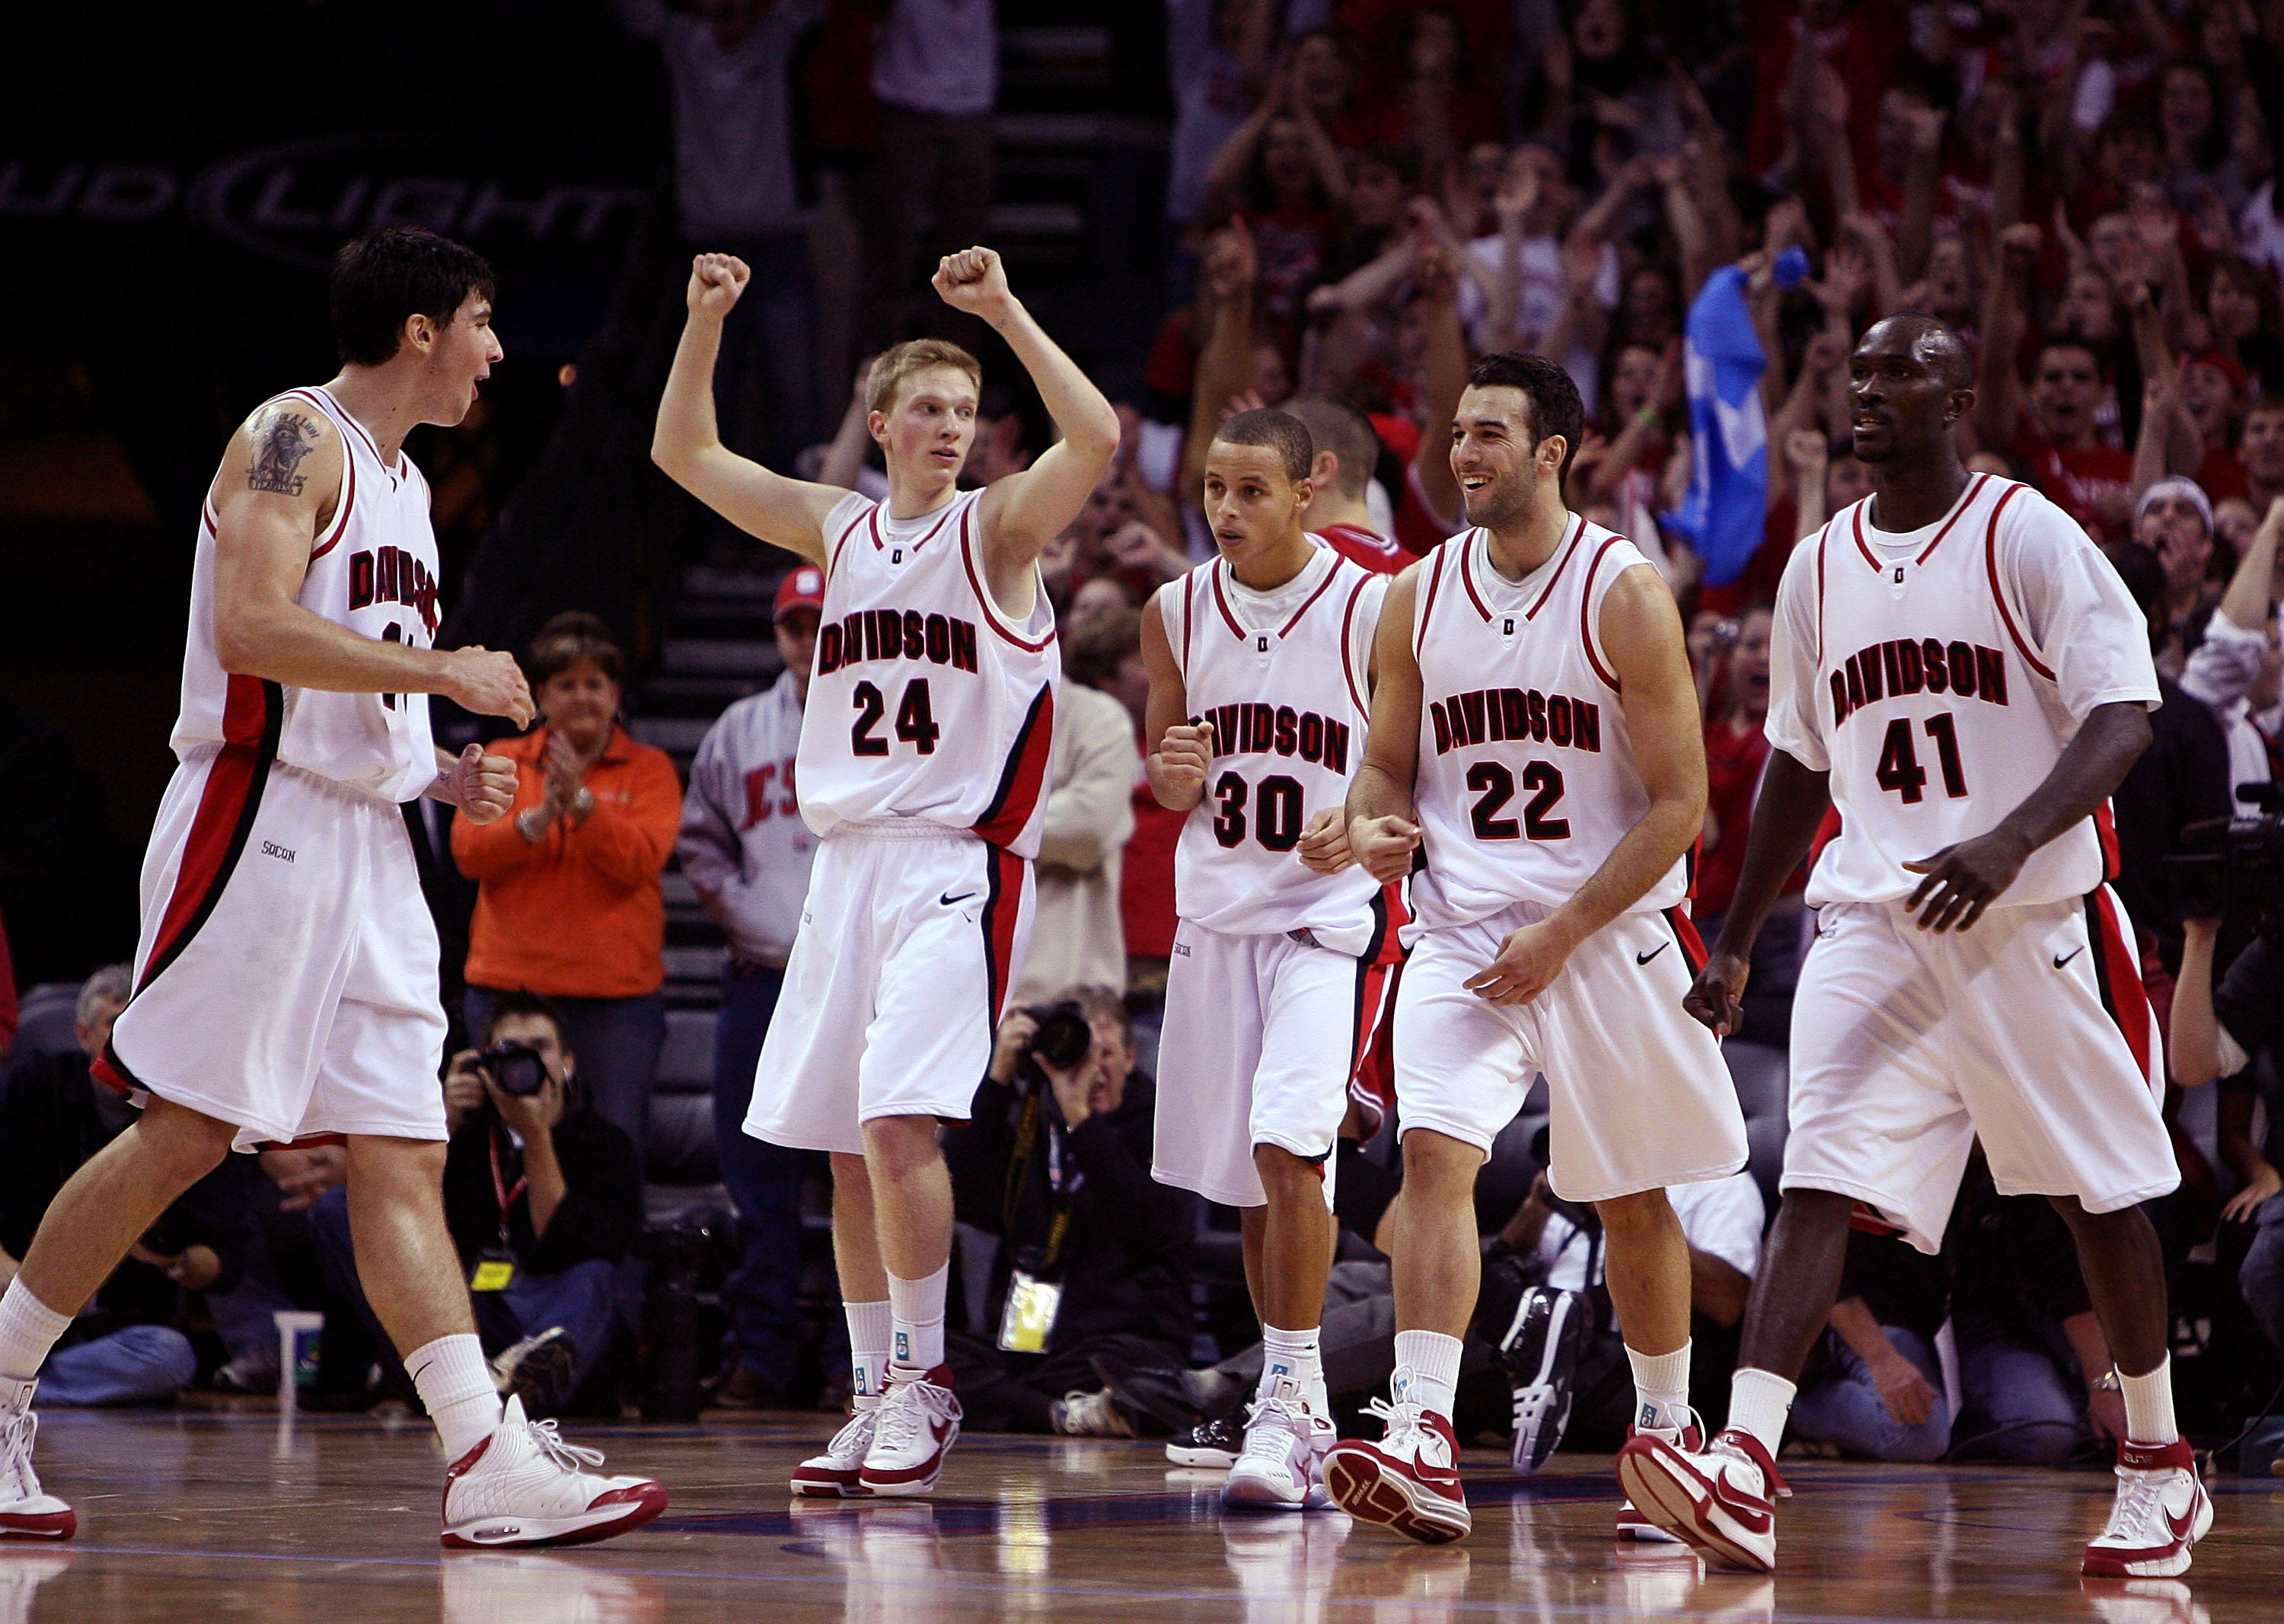 CHARLOTTE, NC - DECEMBER 06:  The Davidson Wildcats react to their 72-67 victory over the North Carolina State Wolfpack after their game at Time Warner Cable Arena on December 6, 2008 in Charlotte, North Carolina.  (Photo by Streeter Lecka/Getty Images)